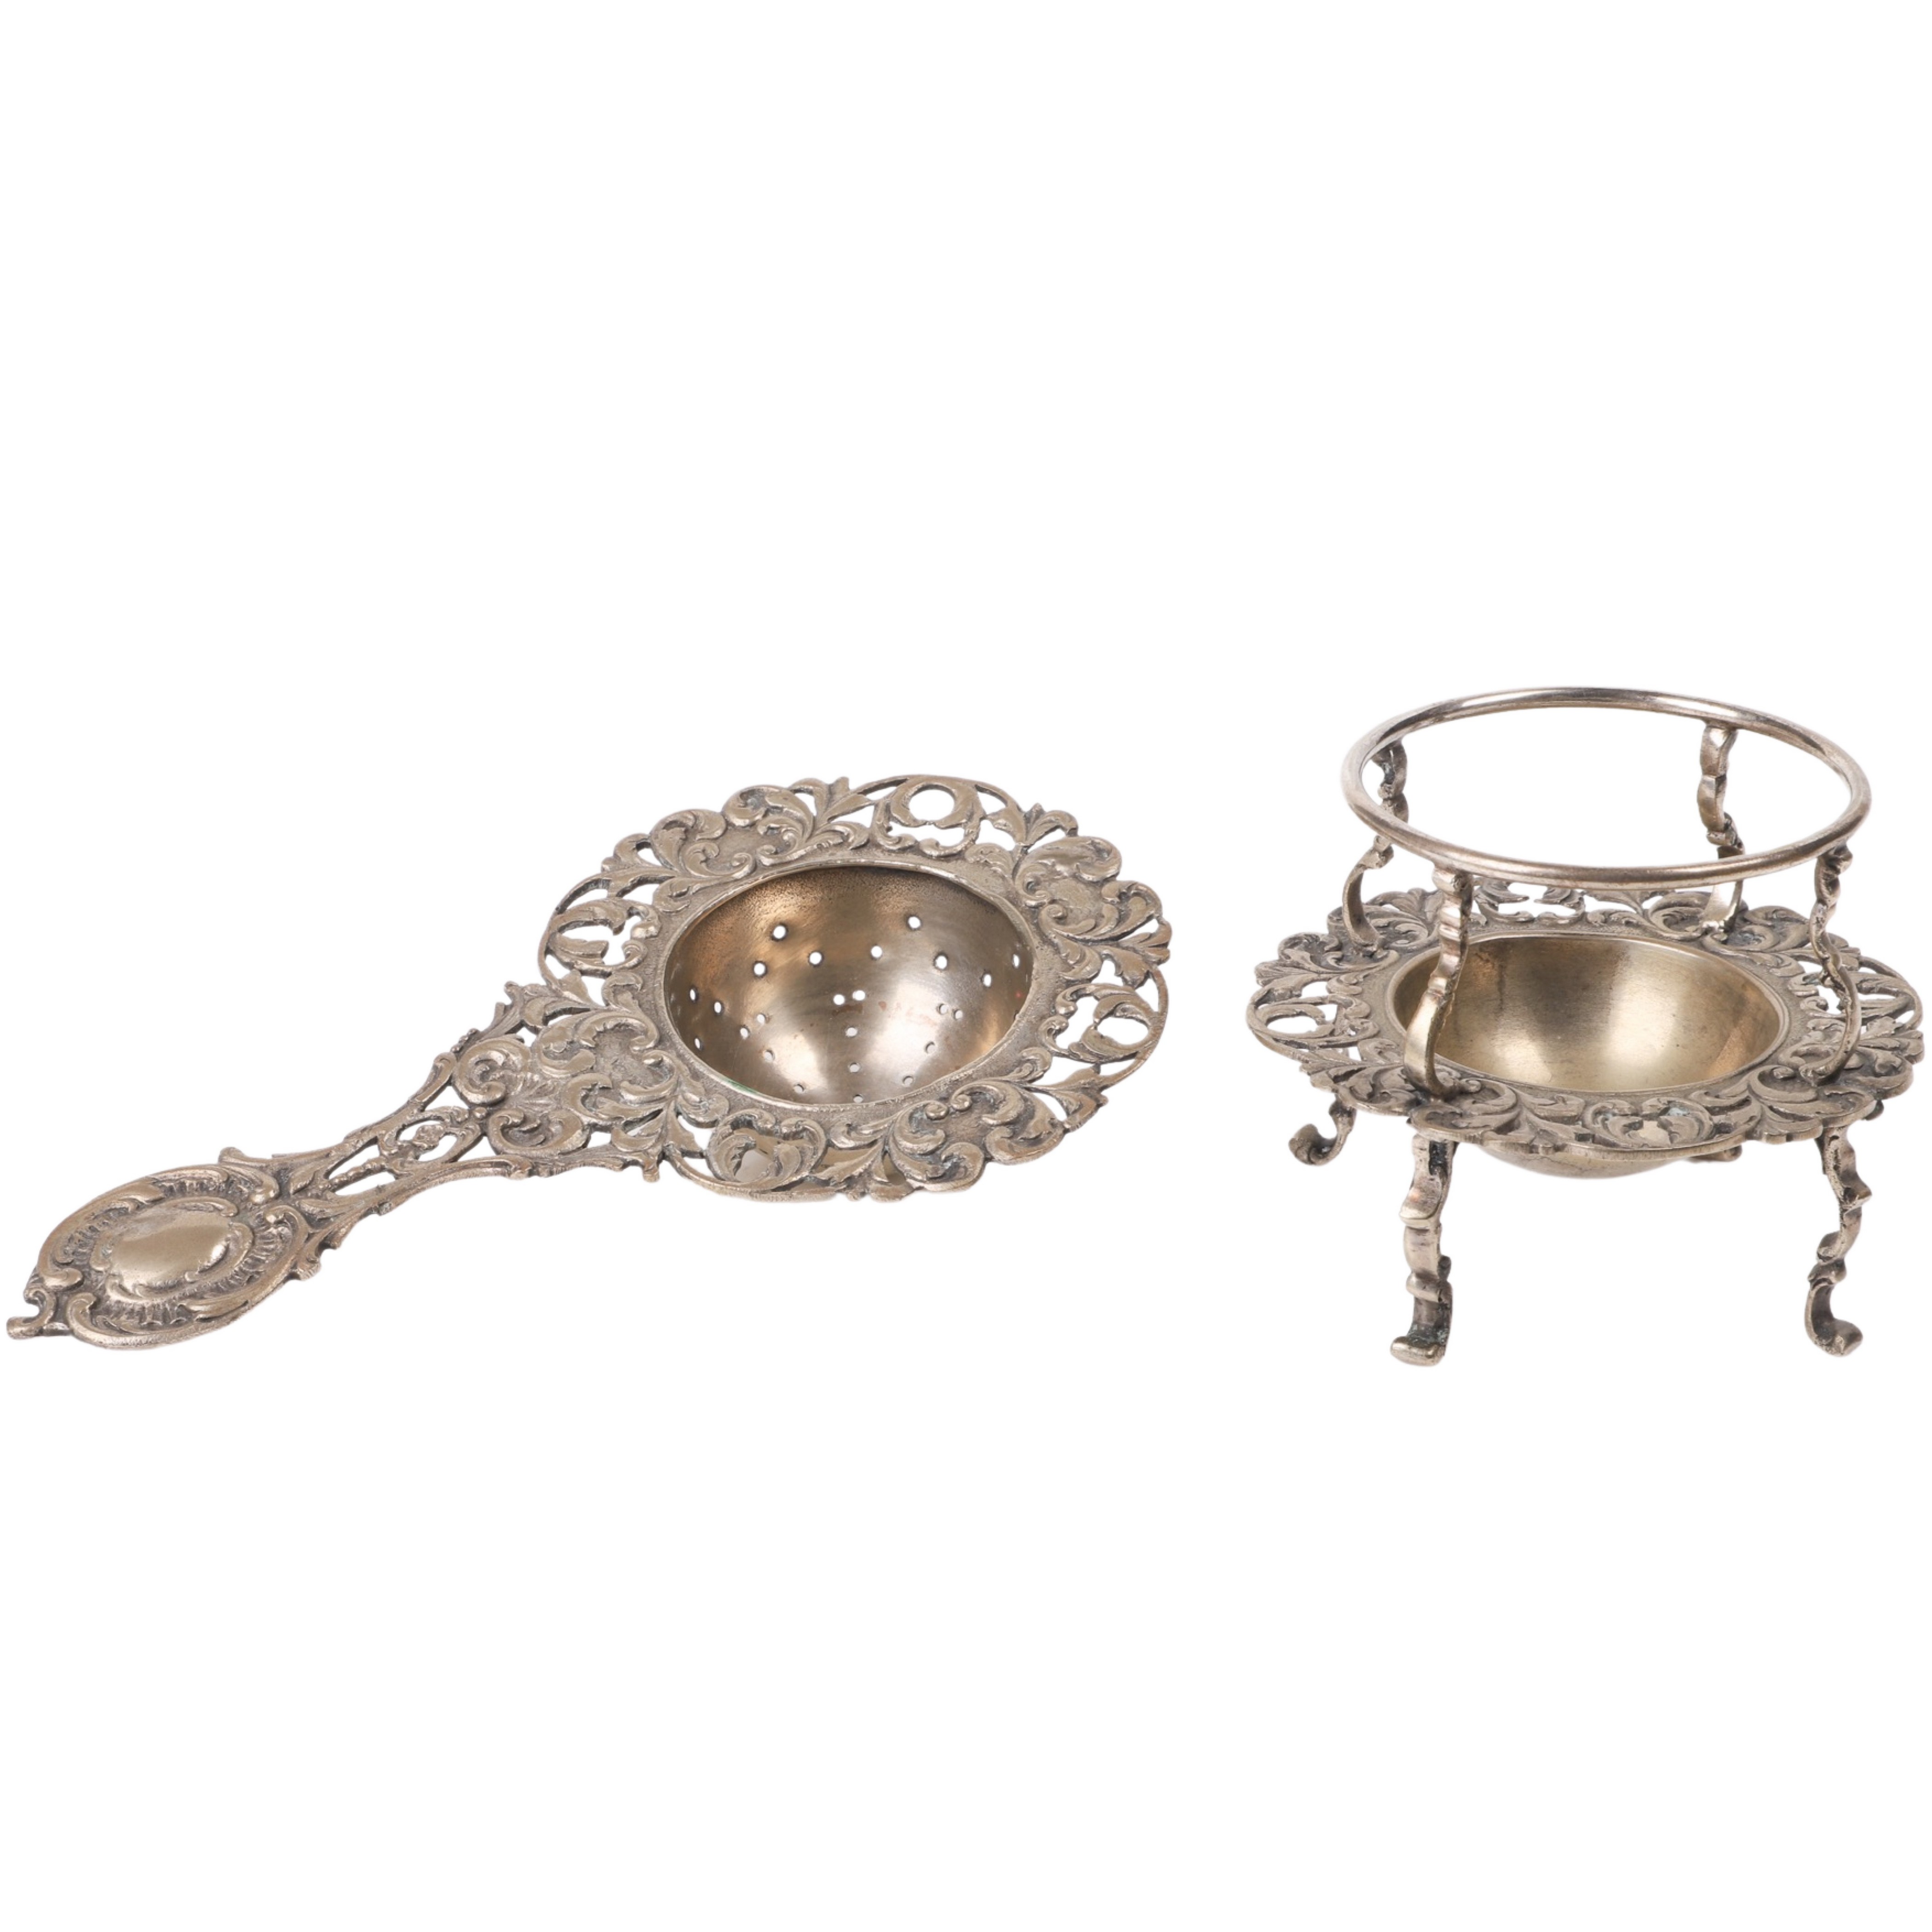 German silver tea strain and stand,